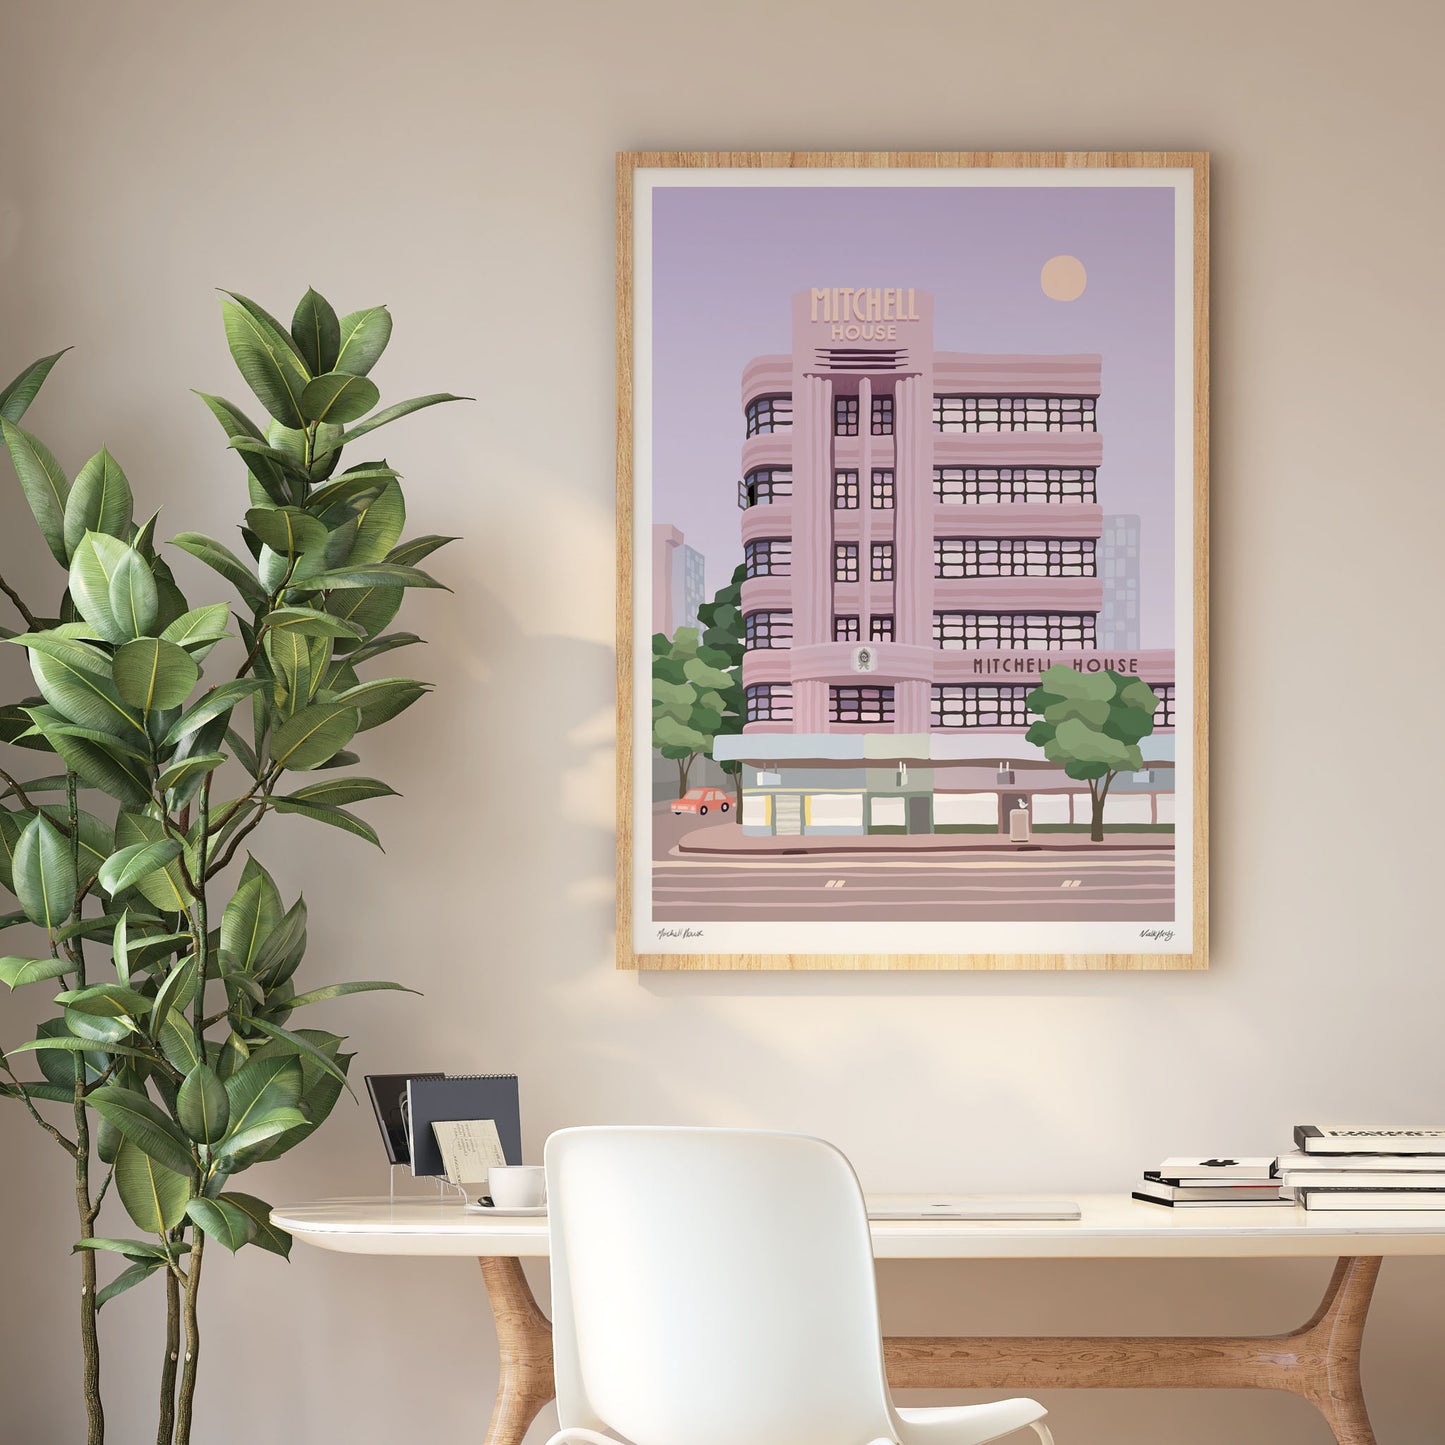 Large wood framed print of colourful illustration of Mitchell House Melbourne city streetscape hanging over a desk